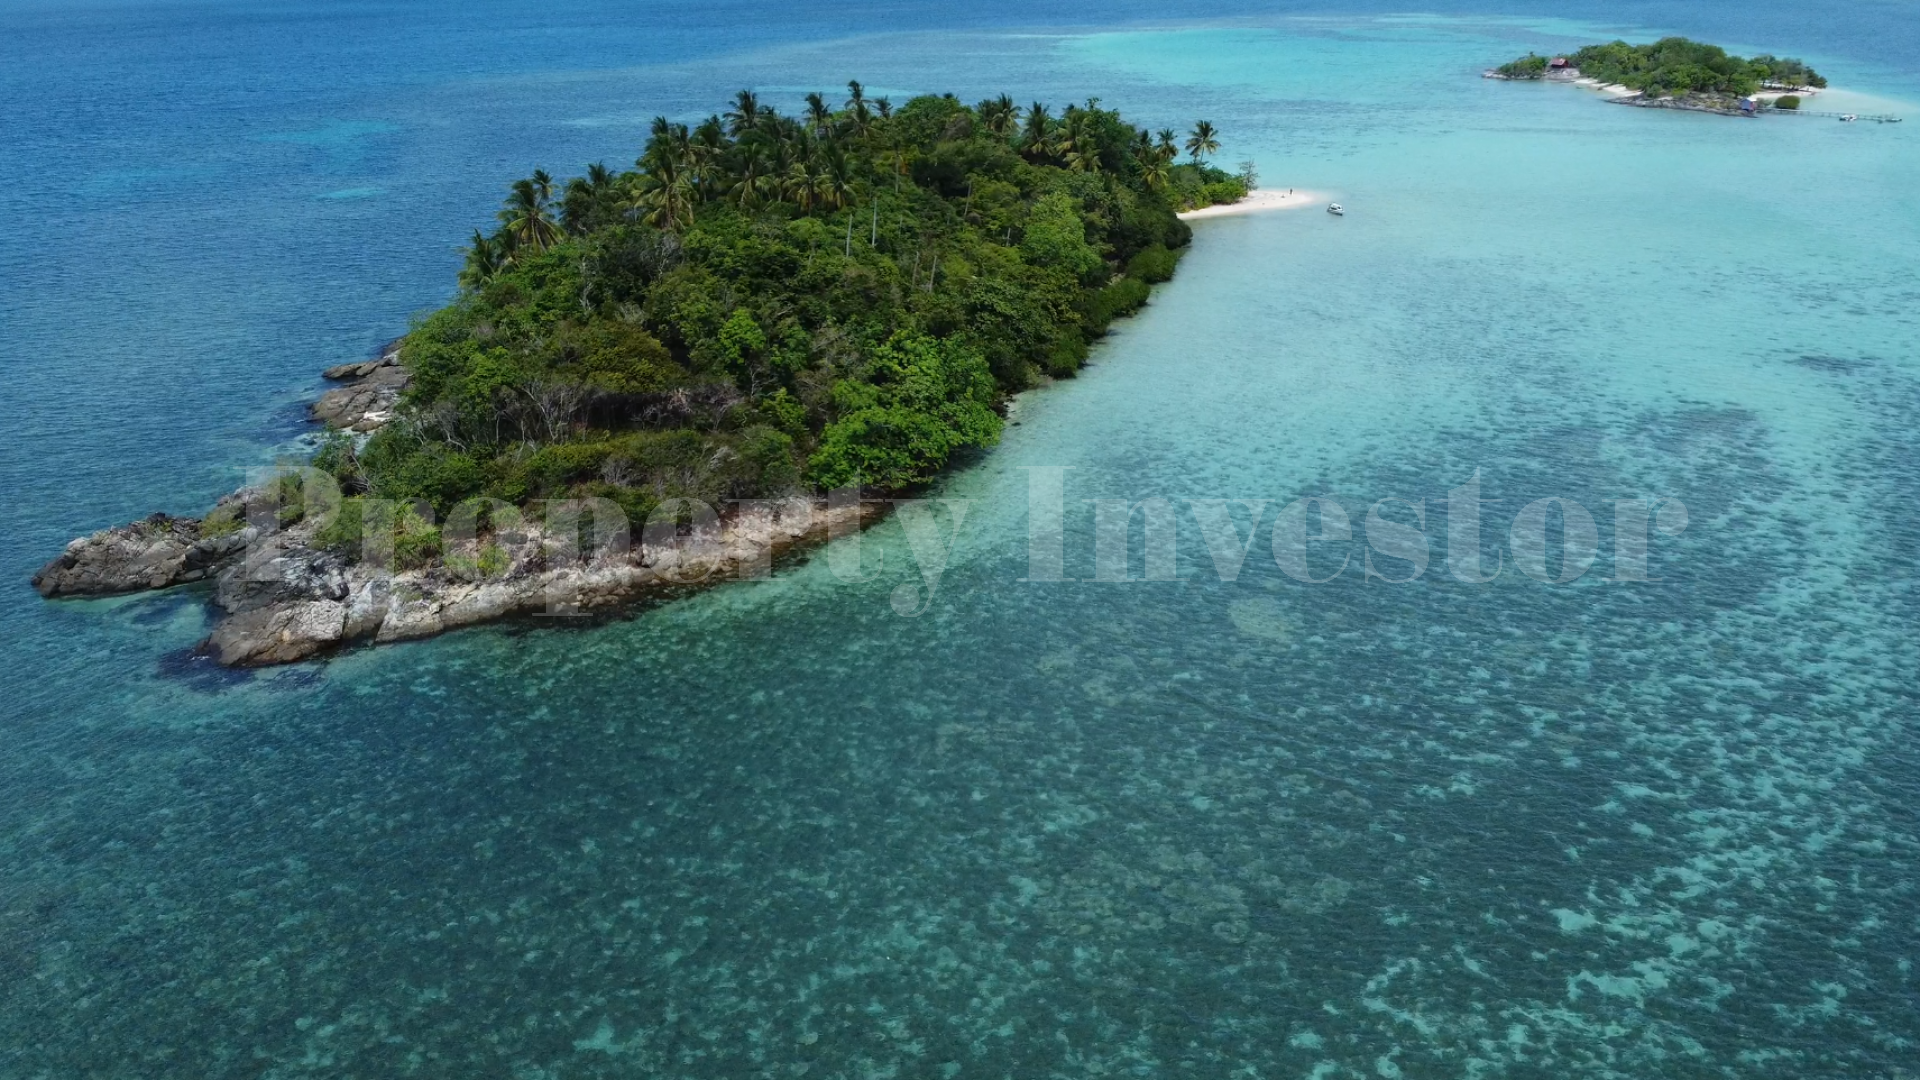 Picture-Perfect 2 Hectare Virgin Island for Commercial Development or Private Residence in the Riau Islands, Indonesia